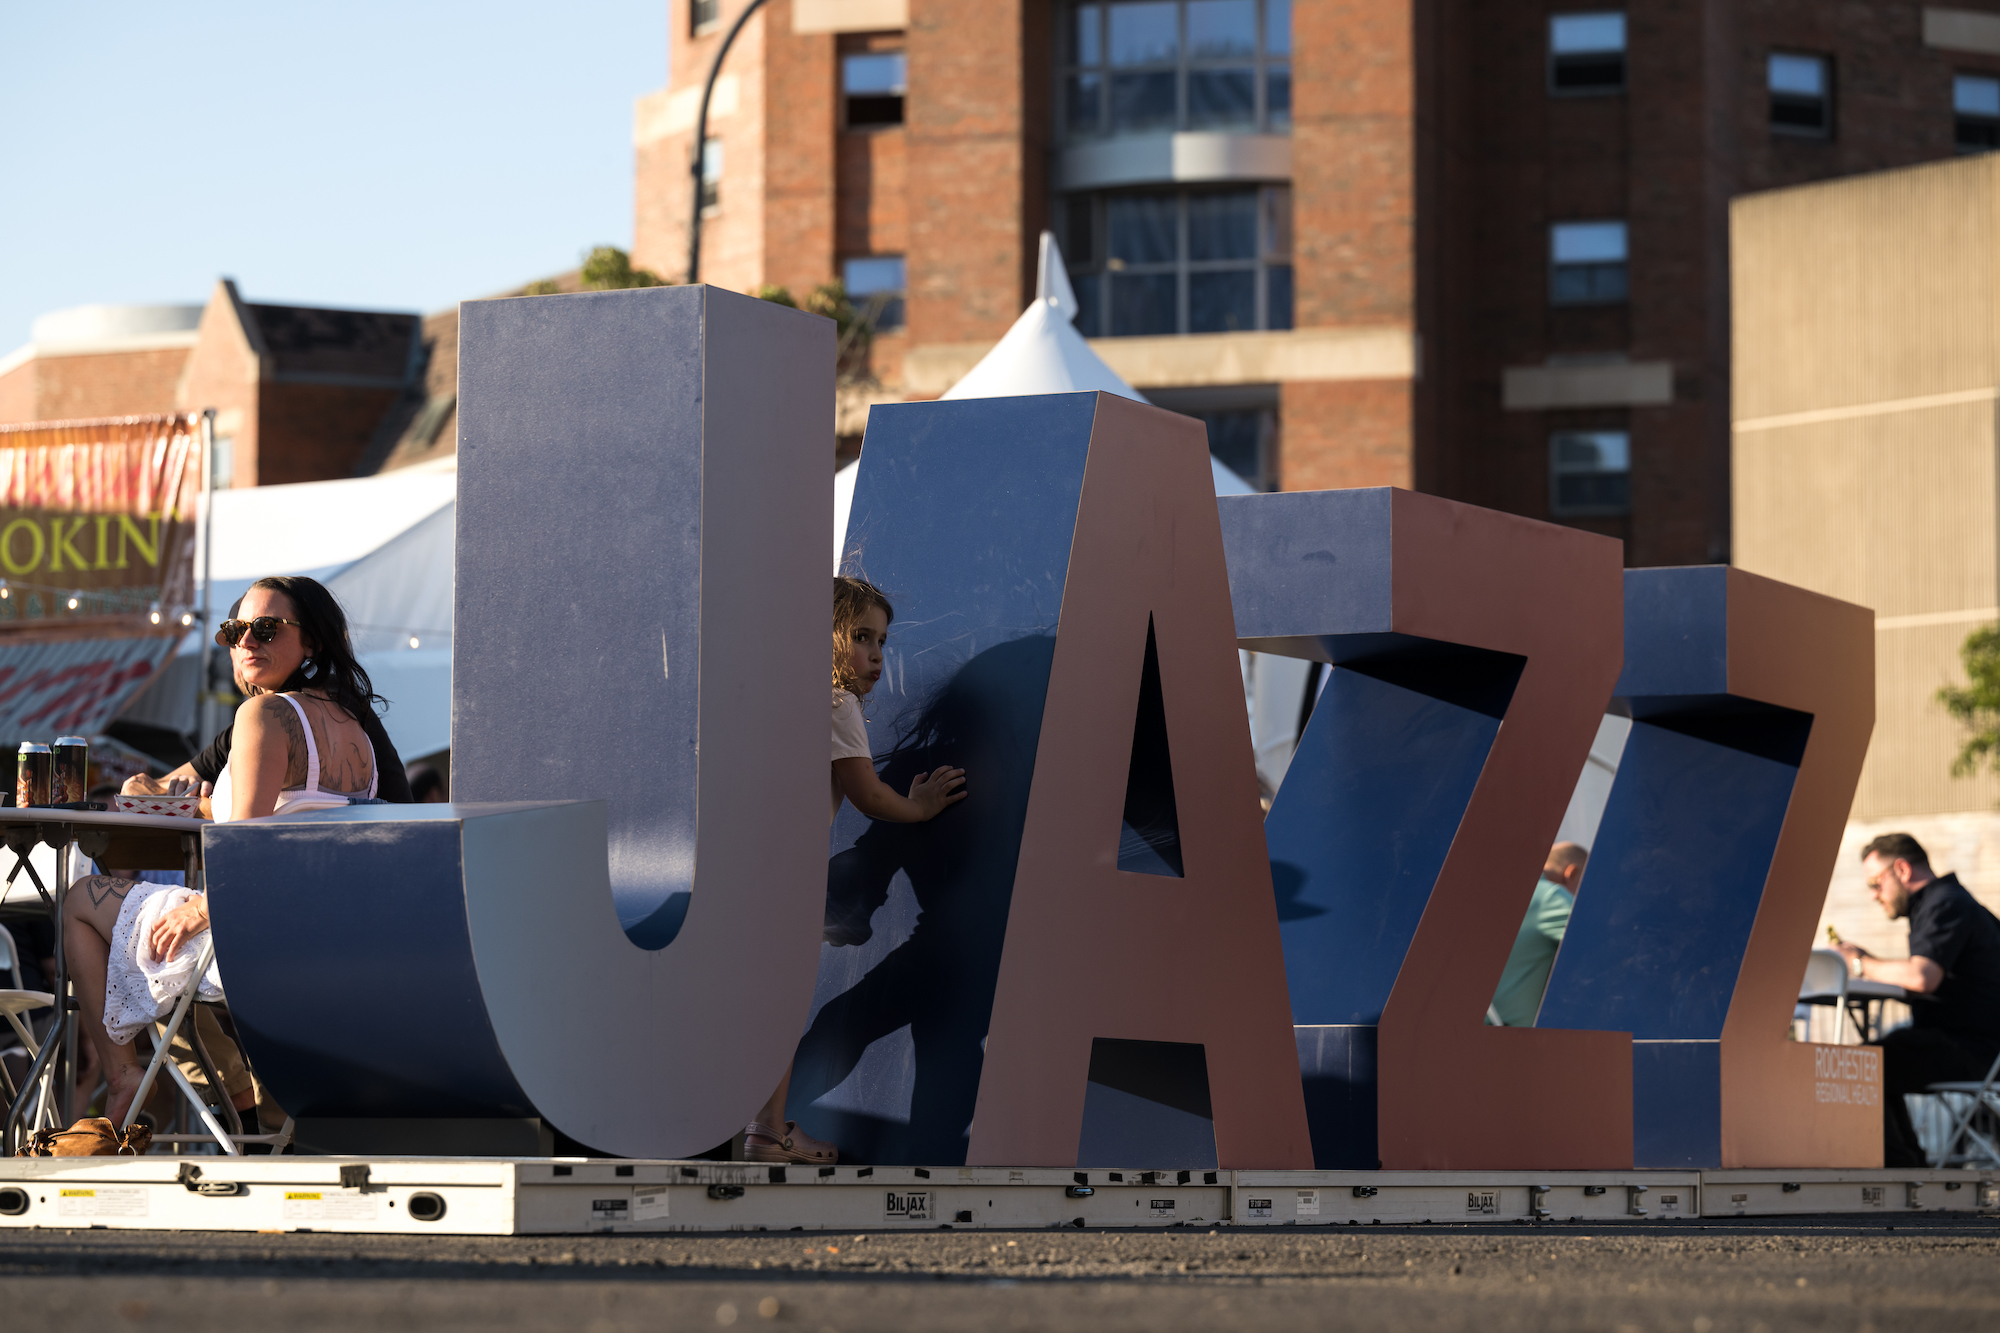 Large letters spelling out JAZZ